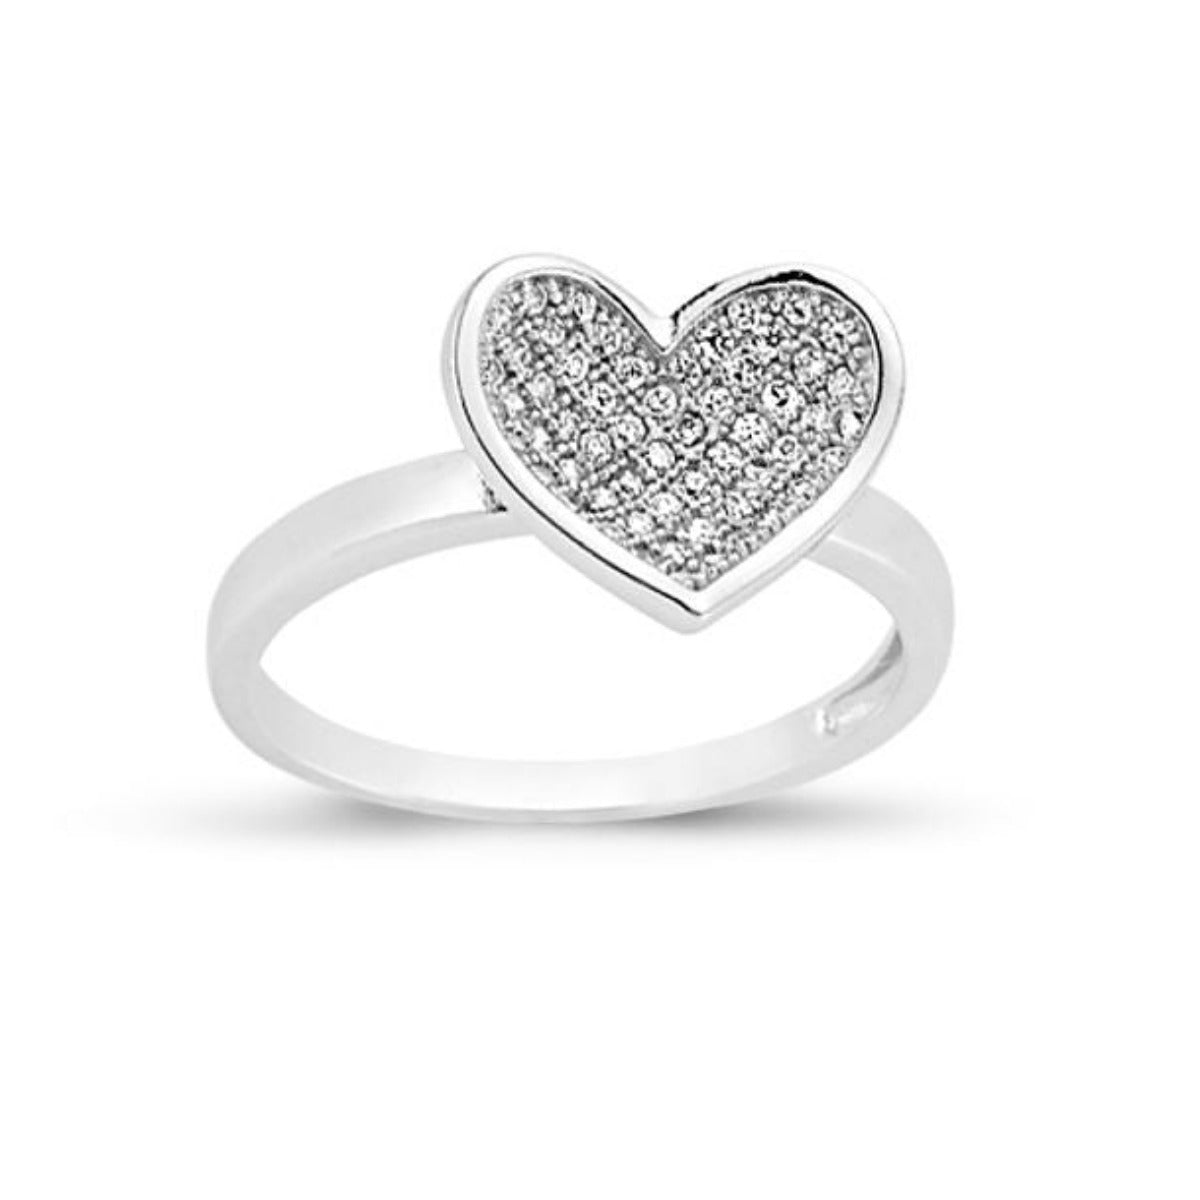 Pave Set Cubic Zirconia Love Heart Ring in Rhodium Plated Silver